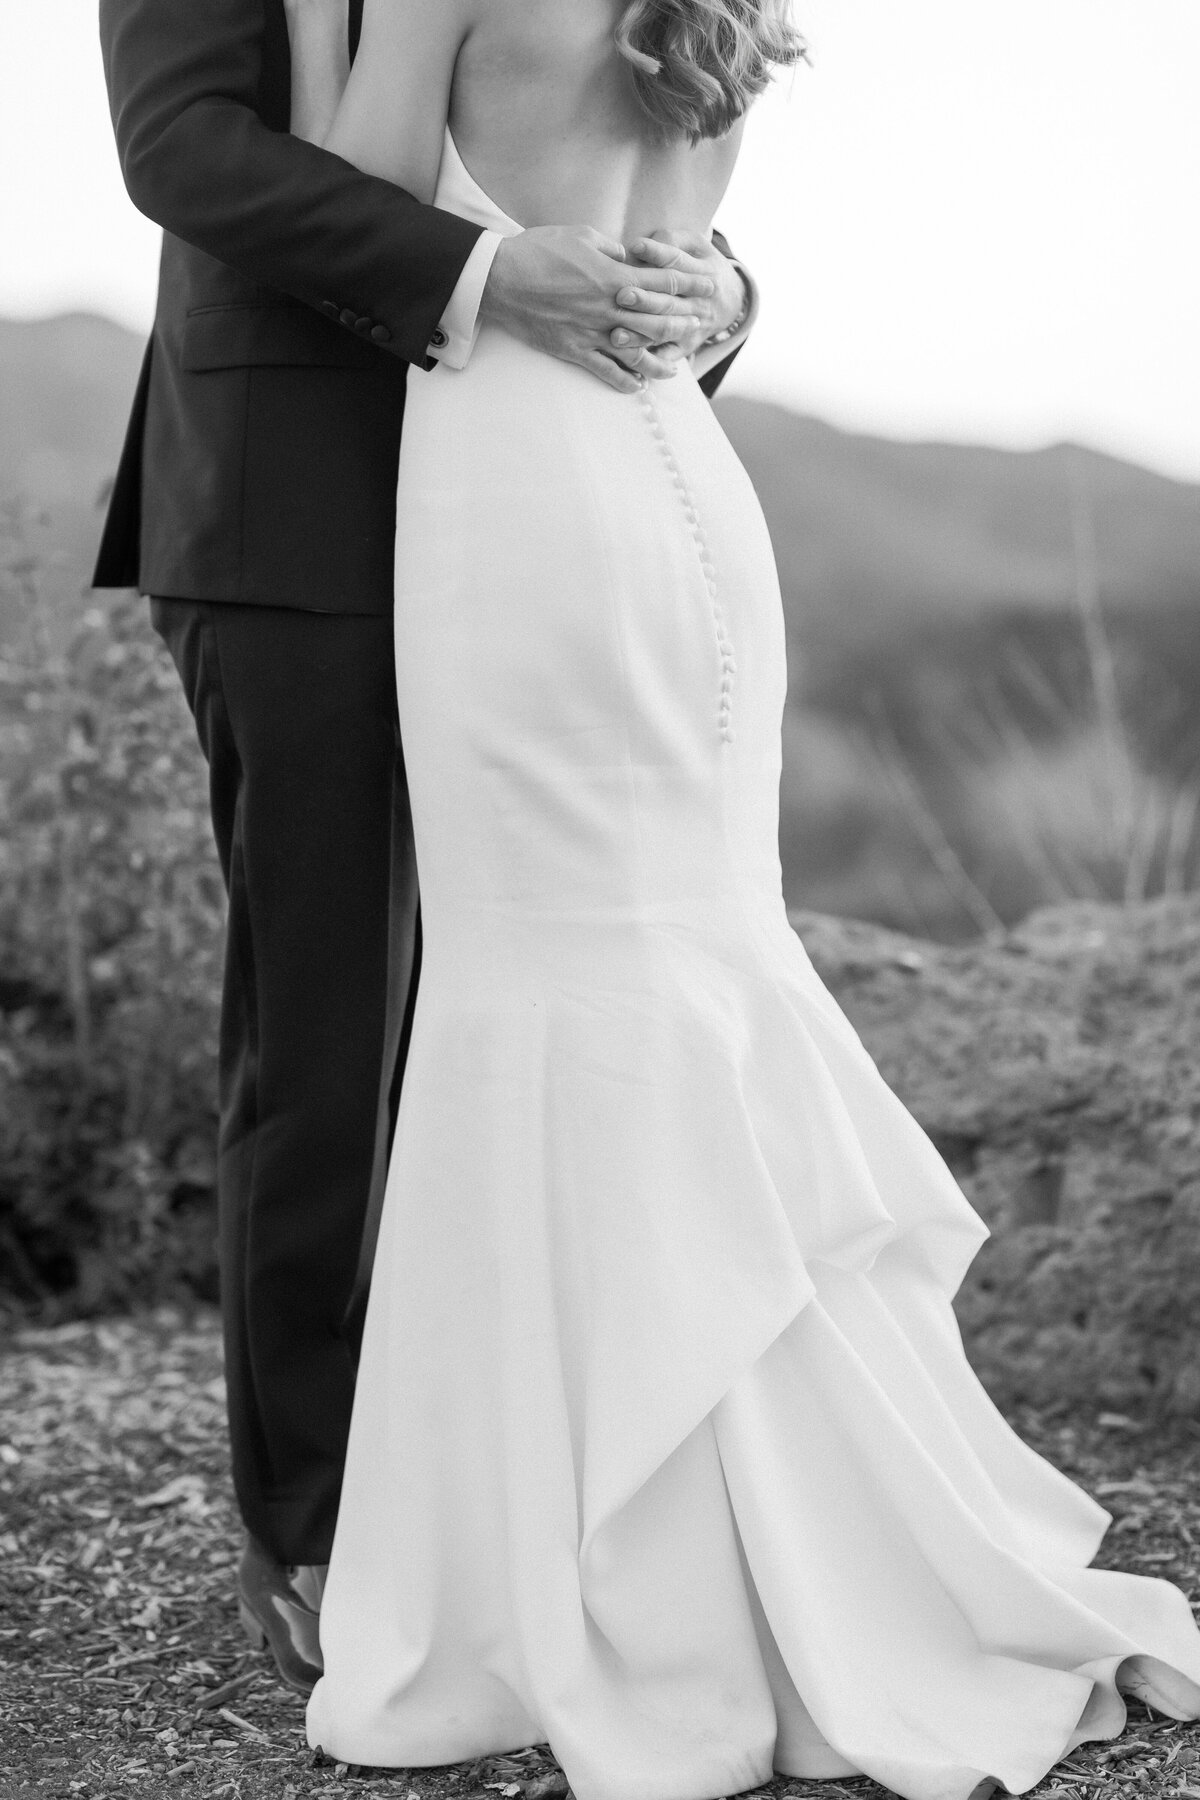 Close up of back of wedding gown as bride and groom embrace